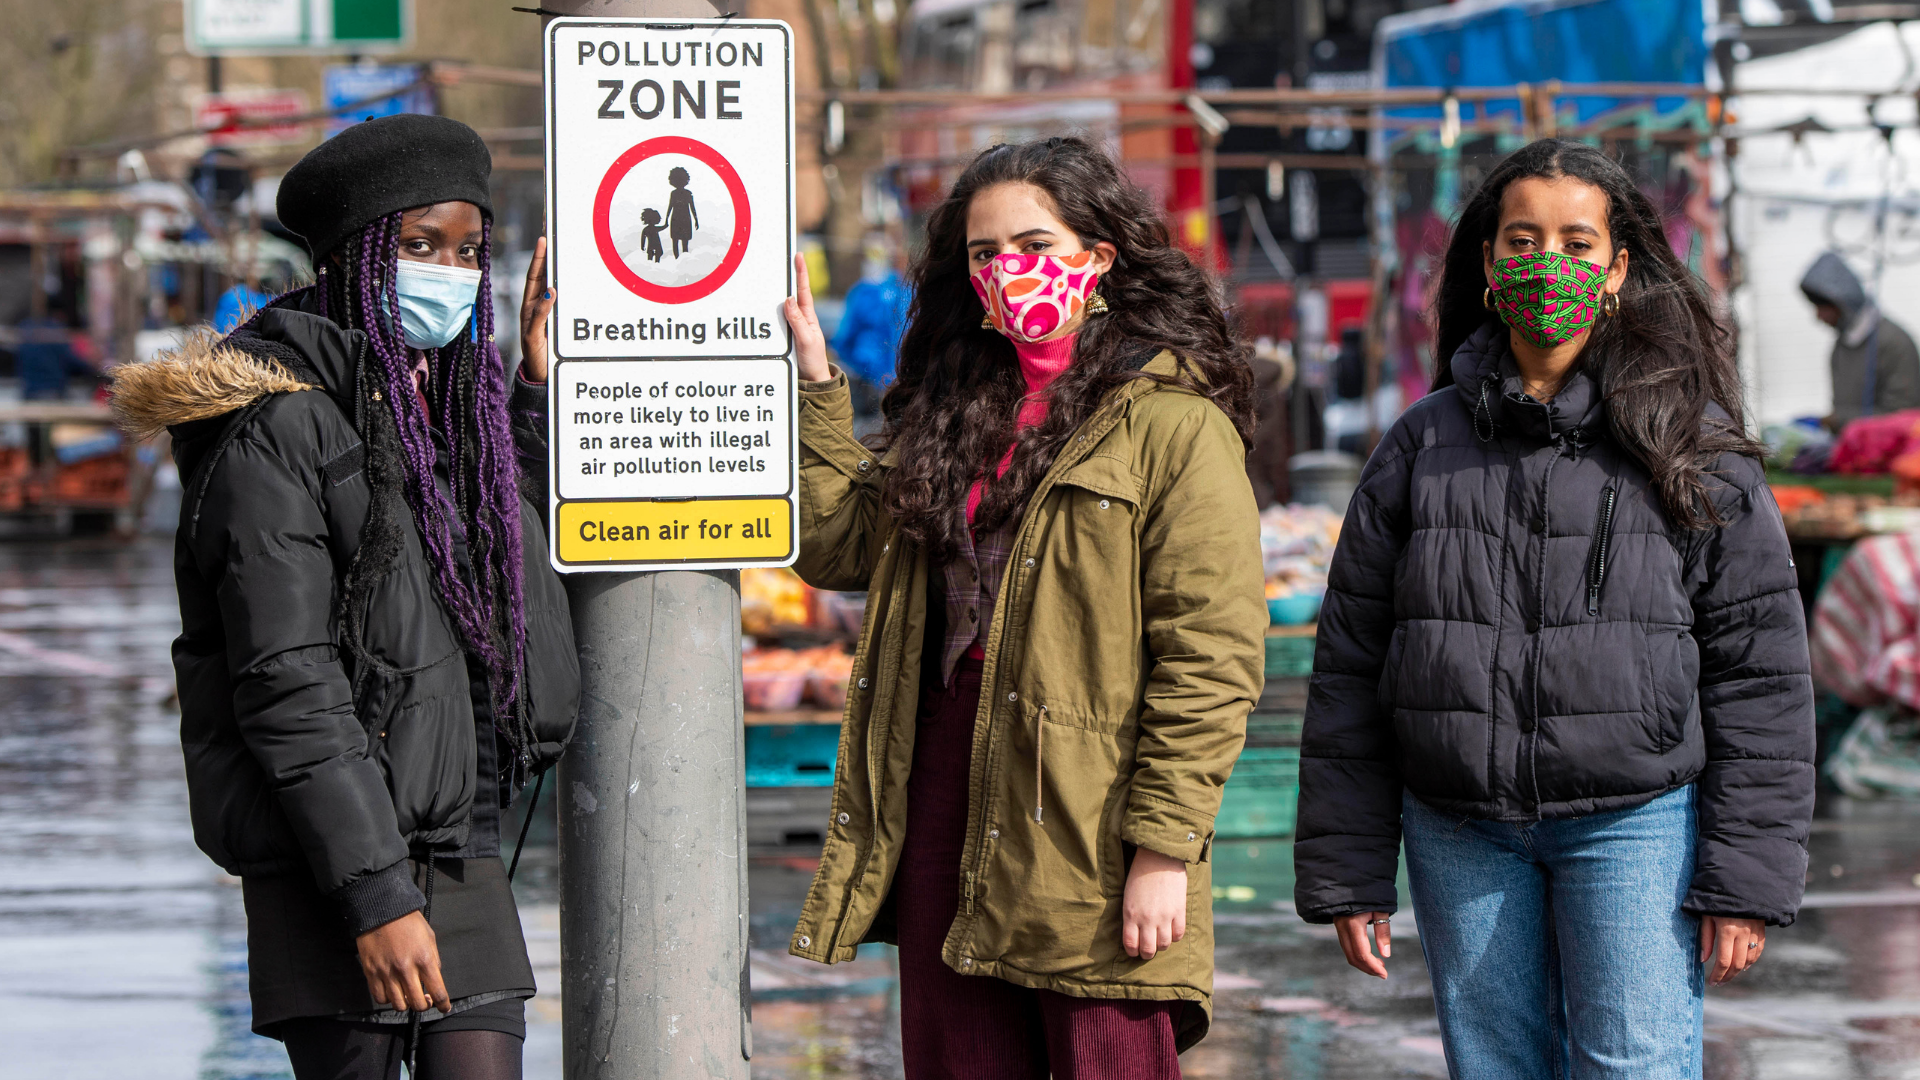 Young activists have begun a “guerrilla campaign” to fight air pollution. Image credit: Choked Up